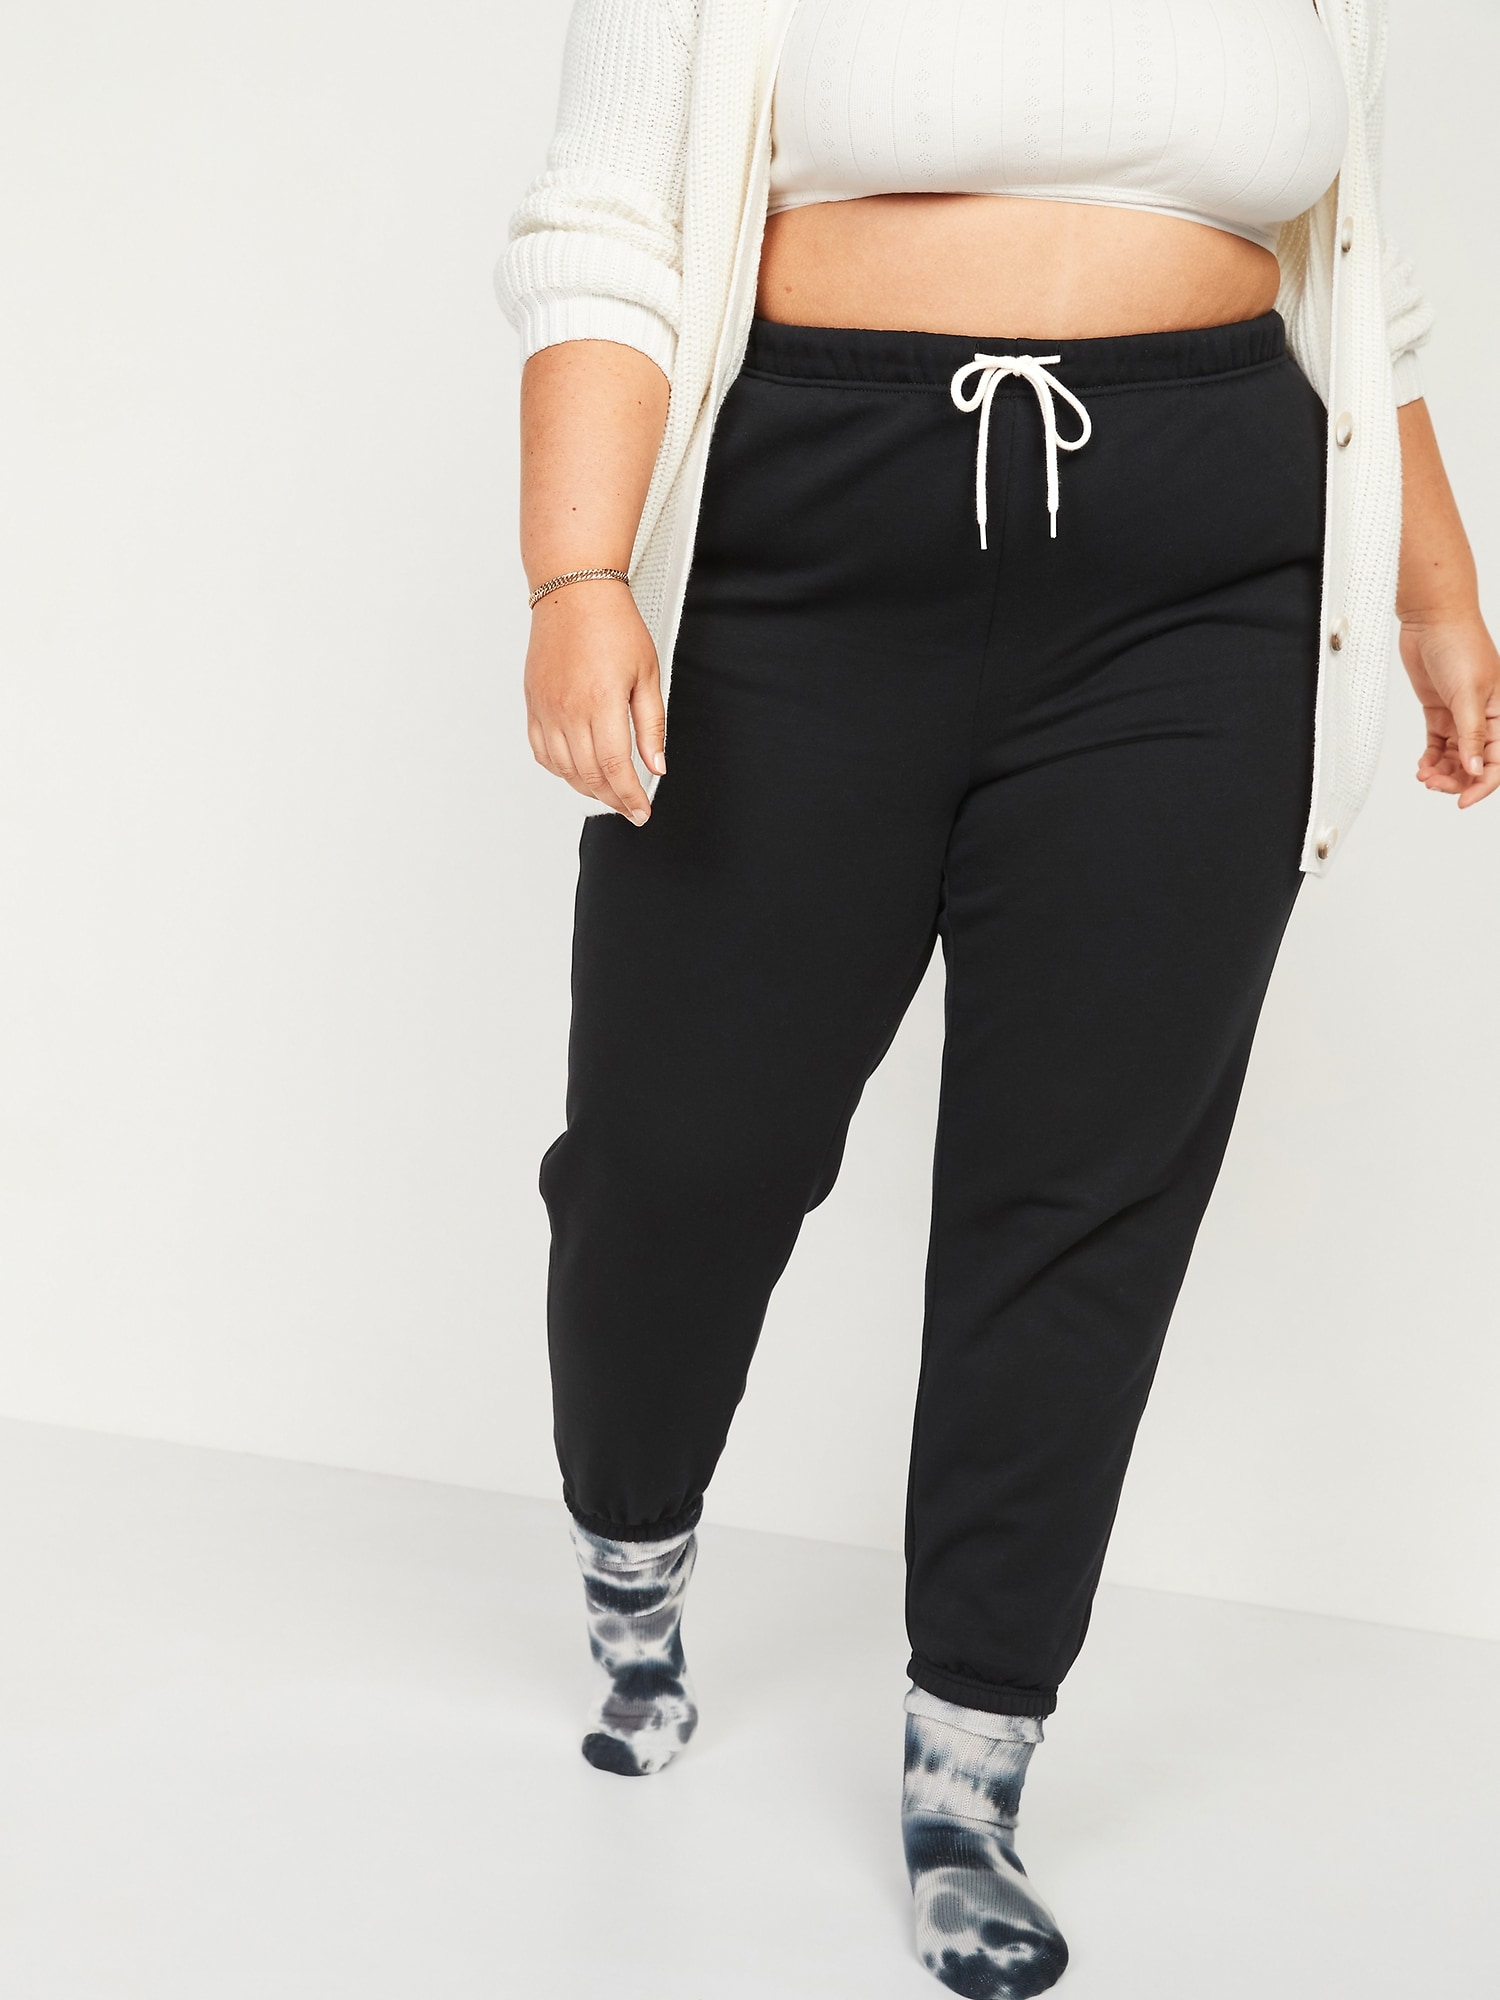 High Waisted Women's Sweatpants for Workouts and France